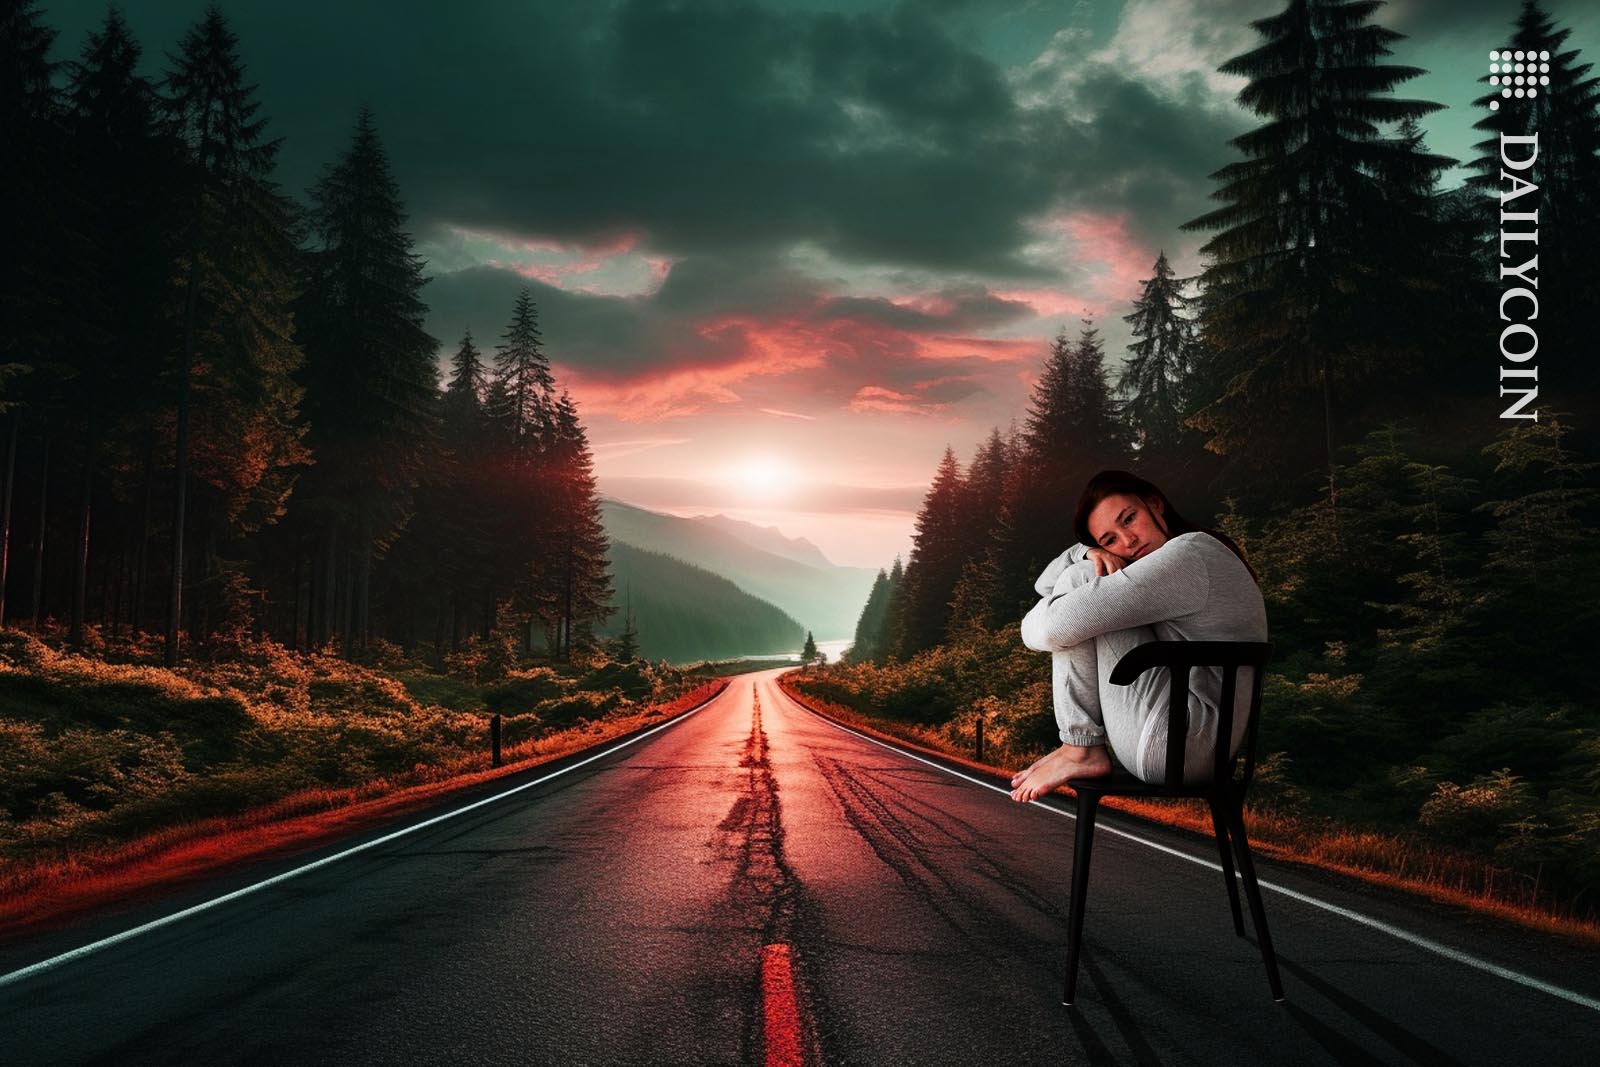 Woman looking sad sitting on a chair, waiting for something on an endless road.